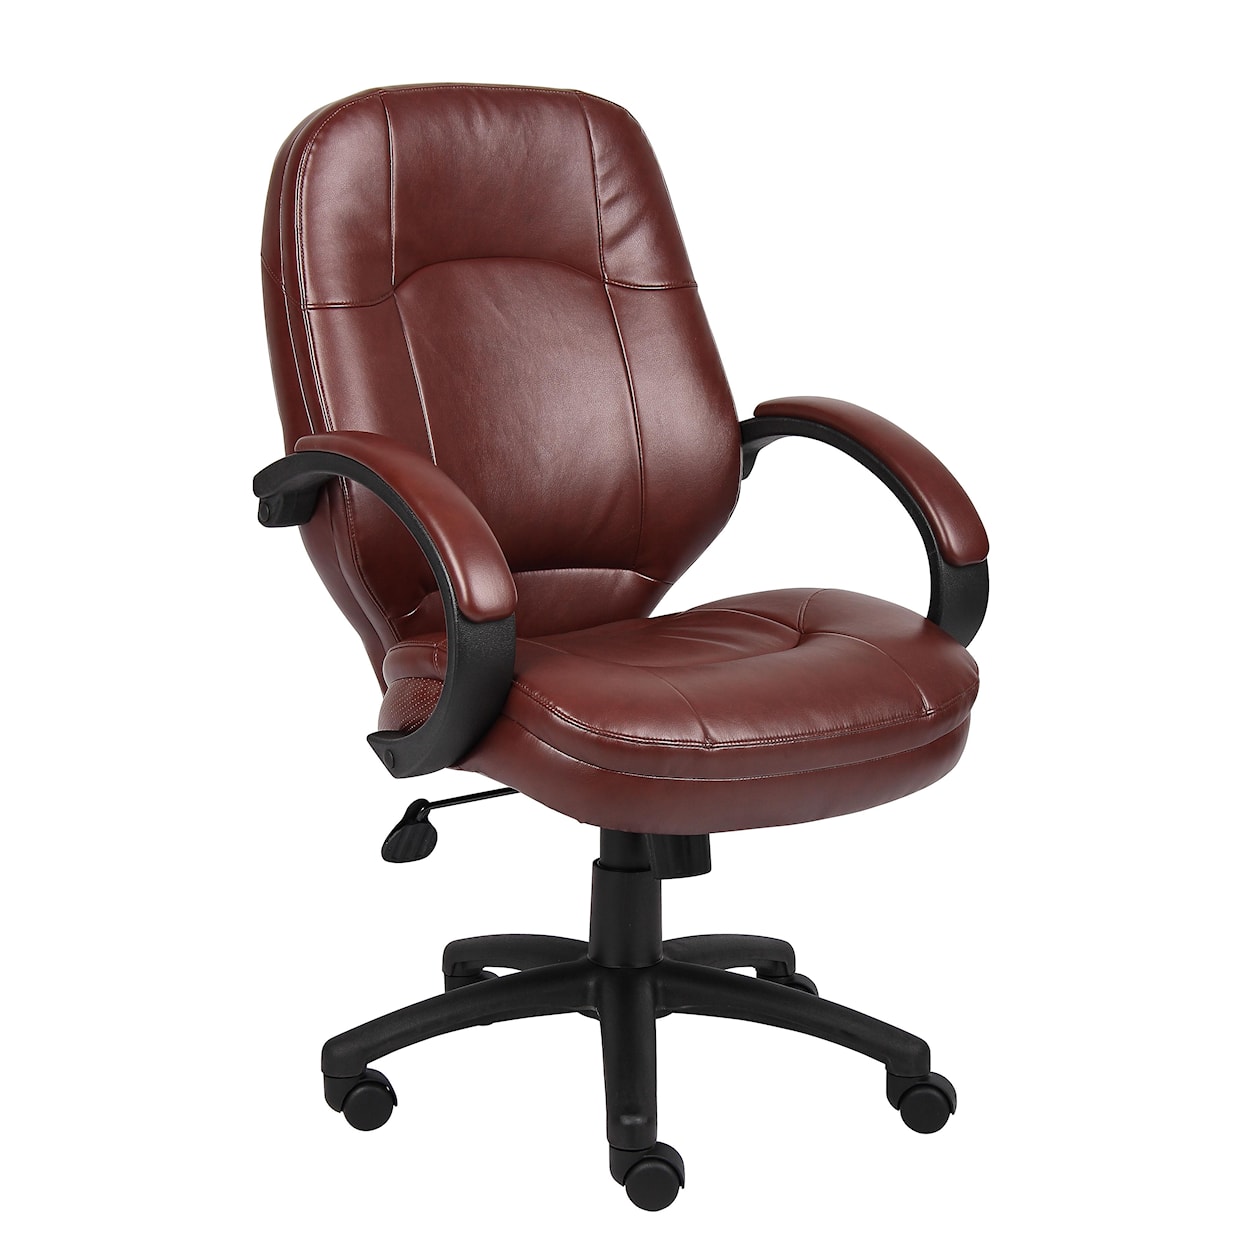 Presidential Seating Executive Chairs LeatherPlus Upholstered Executive Chair